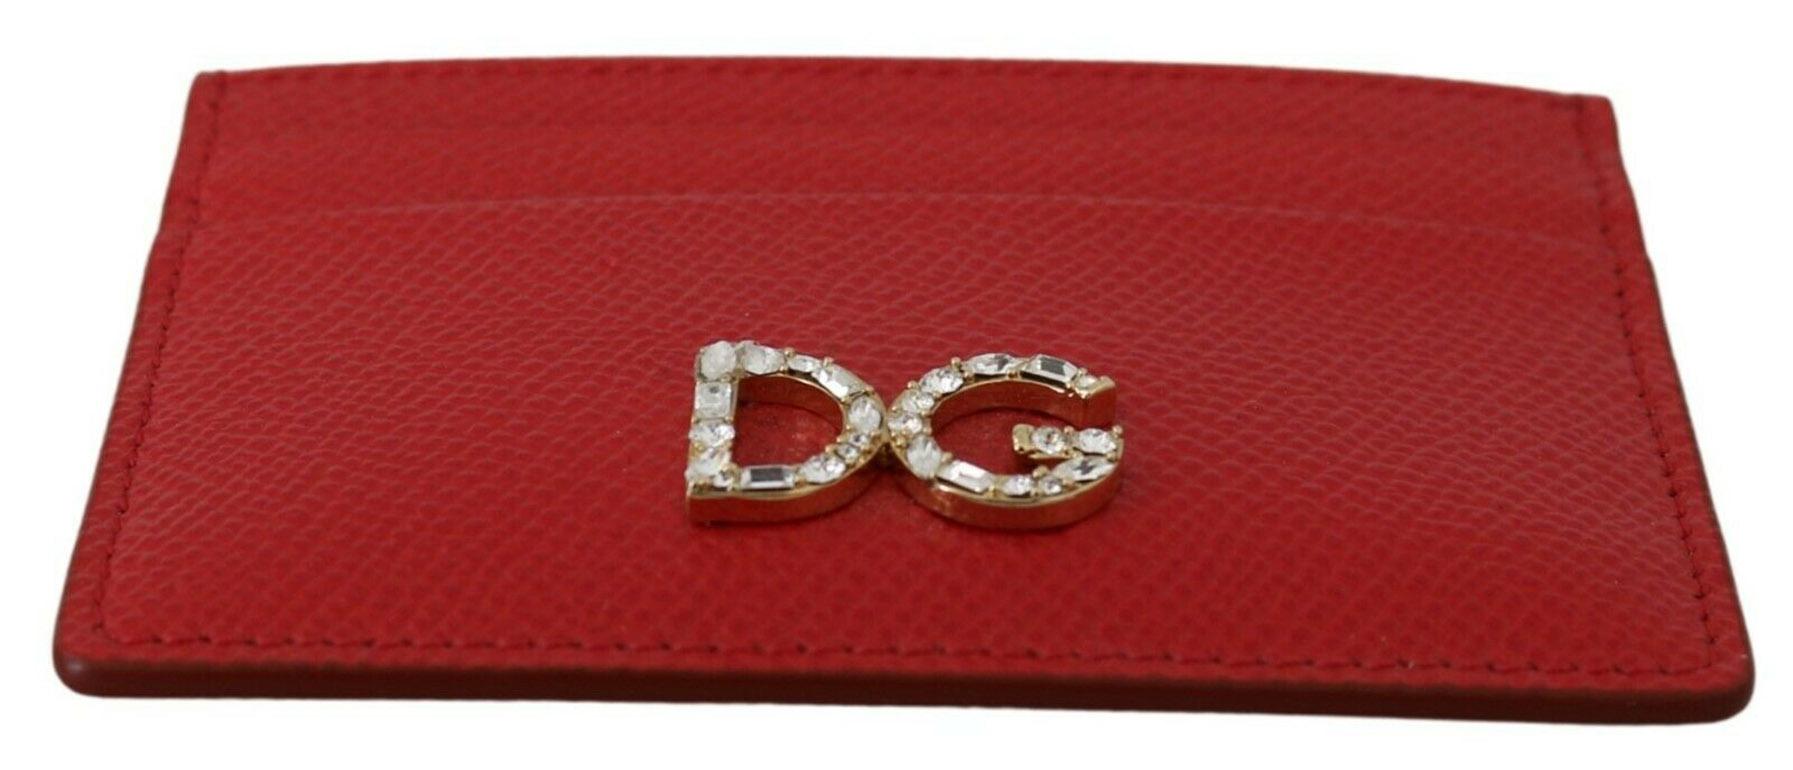 Women's Dolce & Gabbana Red Leather Cardholder Wallet Purse With Clear Crystals DG Logo